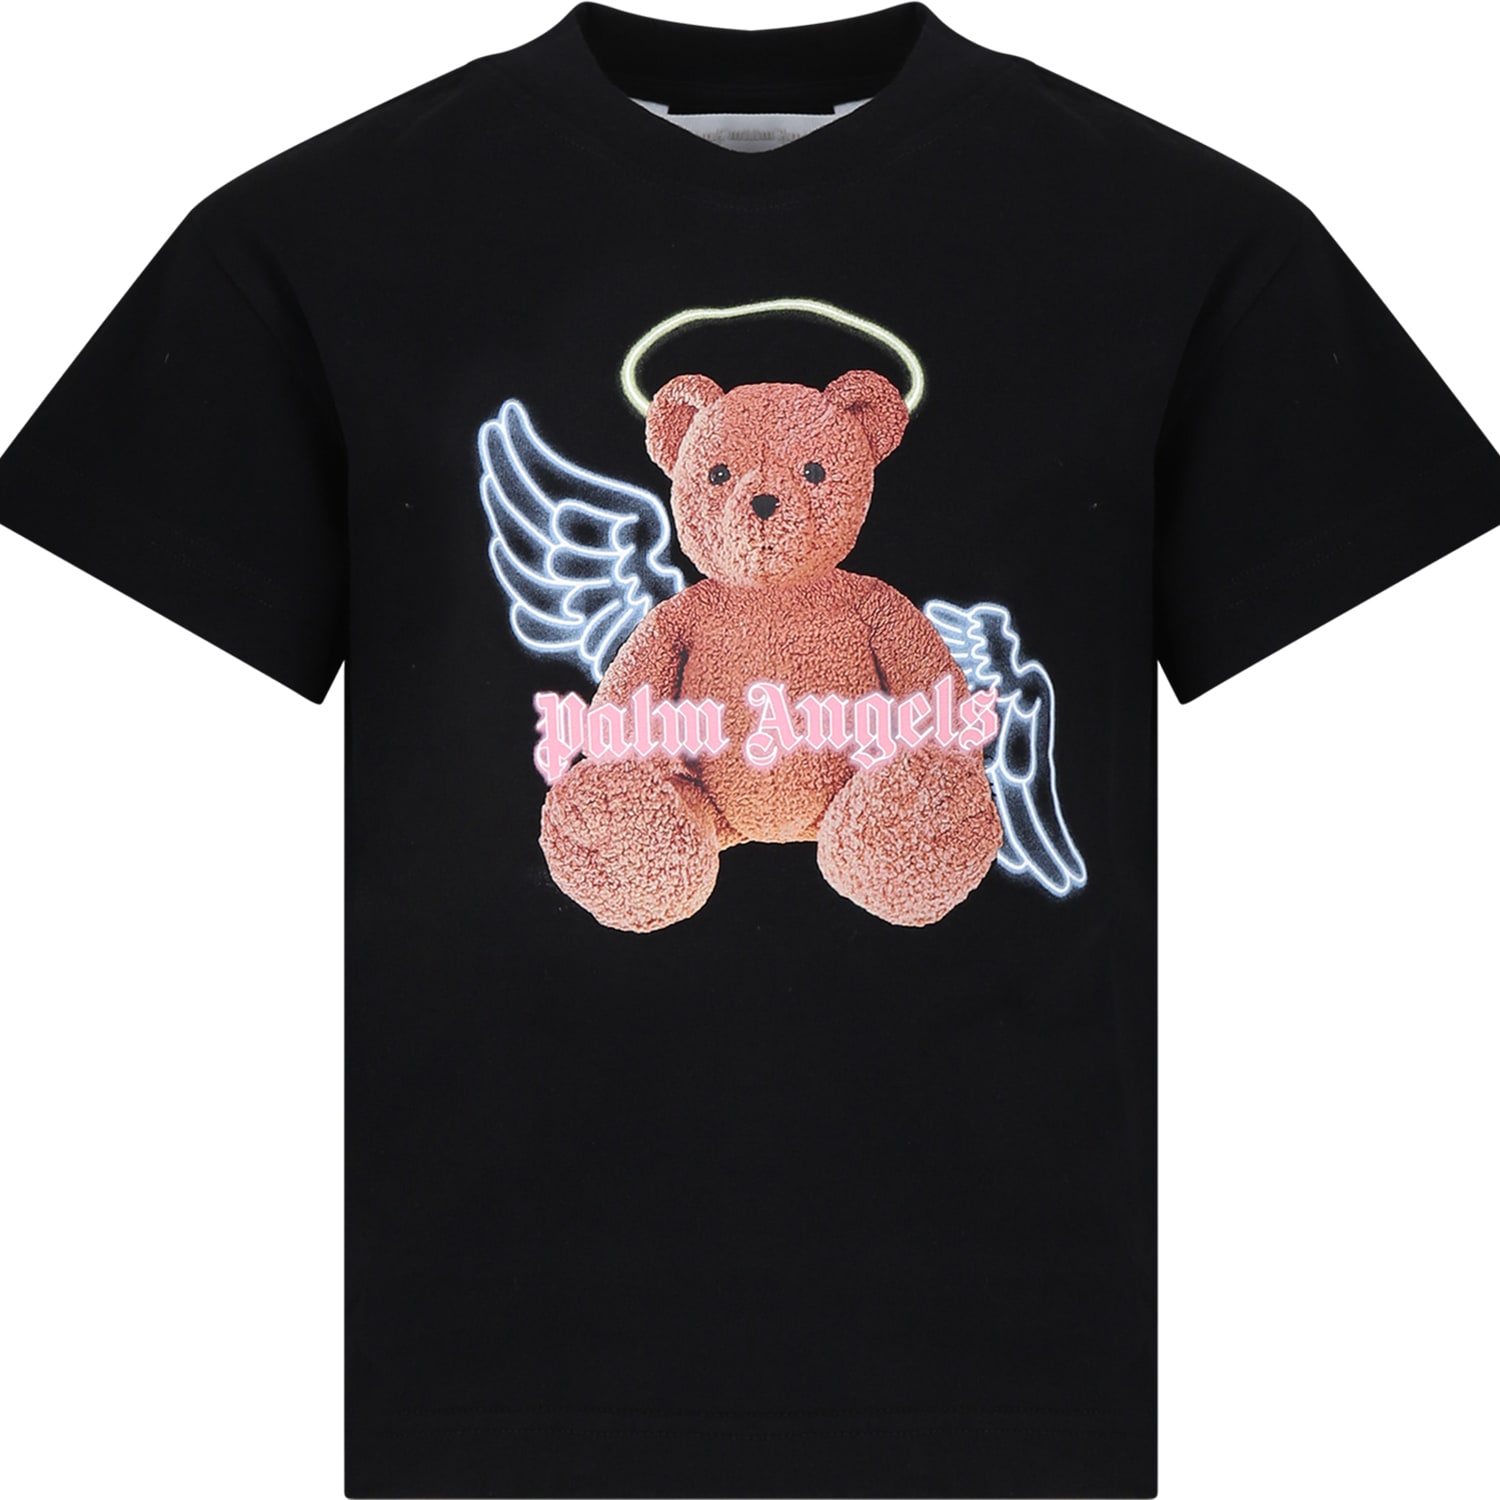 Palm Angels Kids' Black T-shirt For Girl With Bear